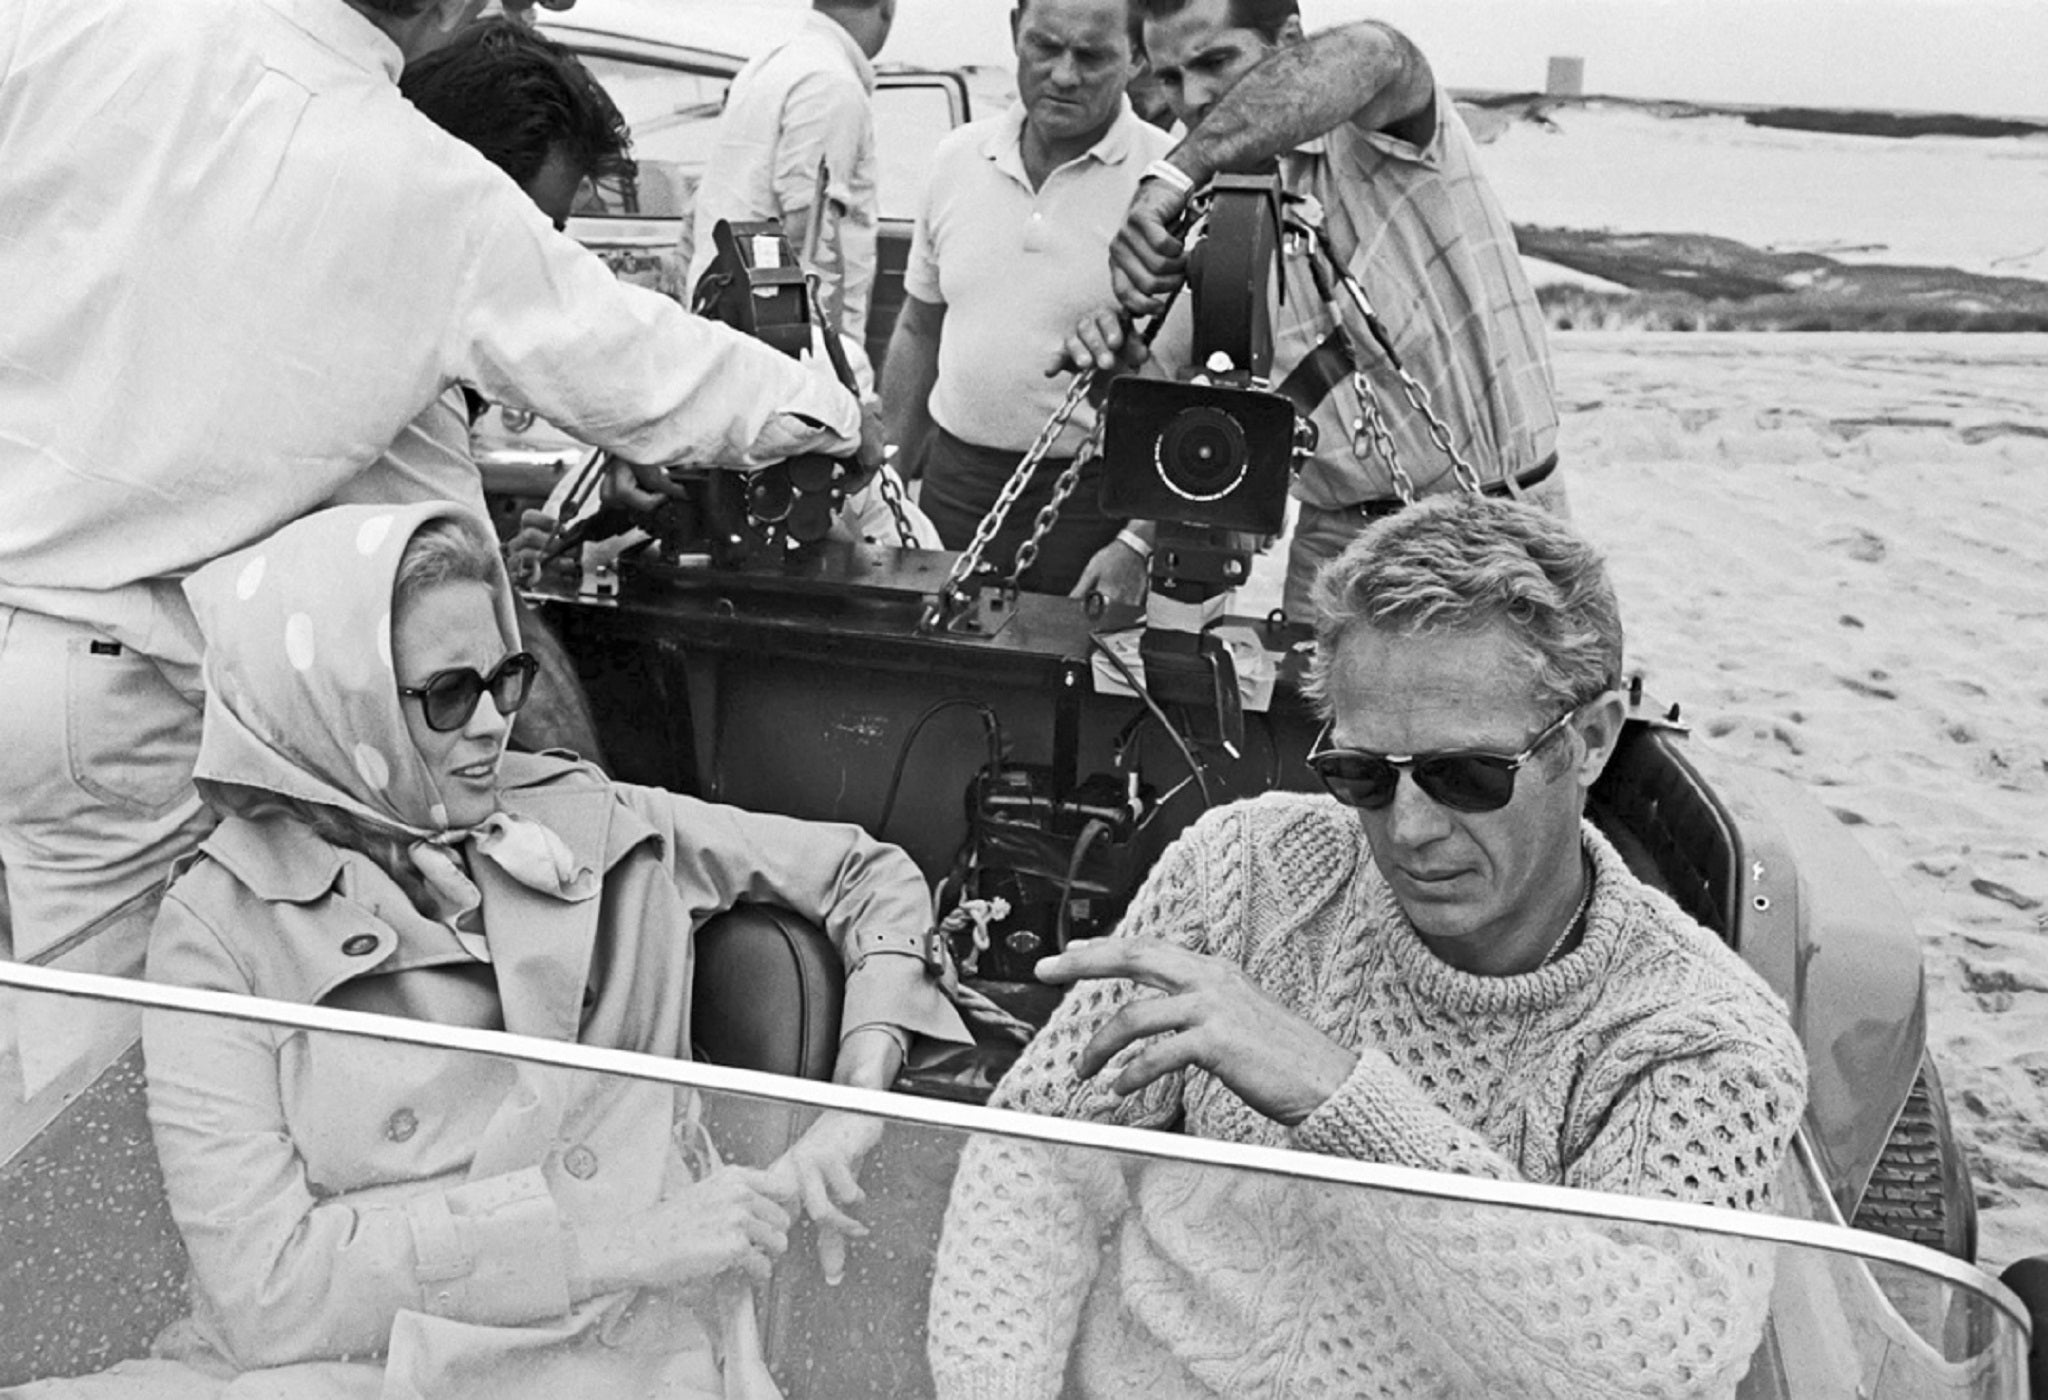 Style icon Steve McQueen shows how to wear a simple and casual cable knit sweater.